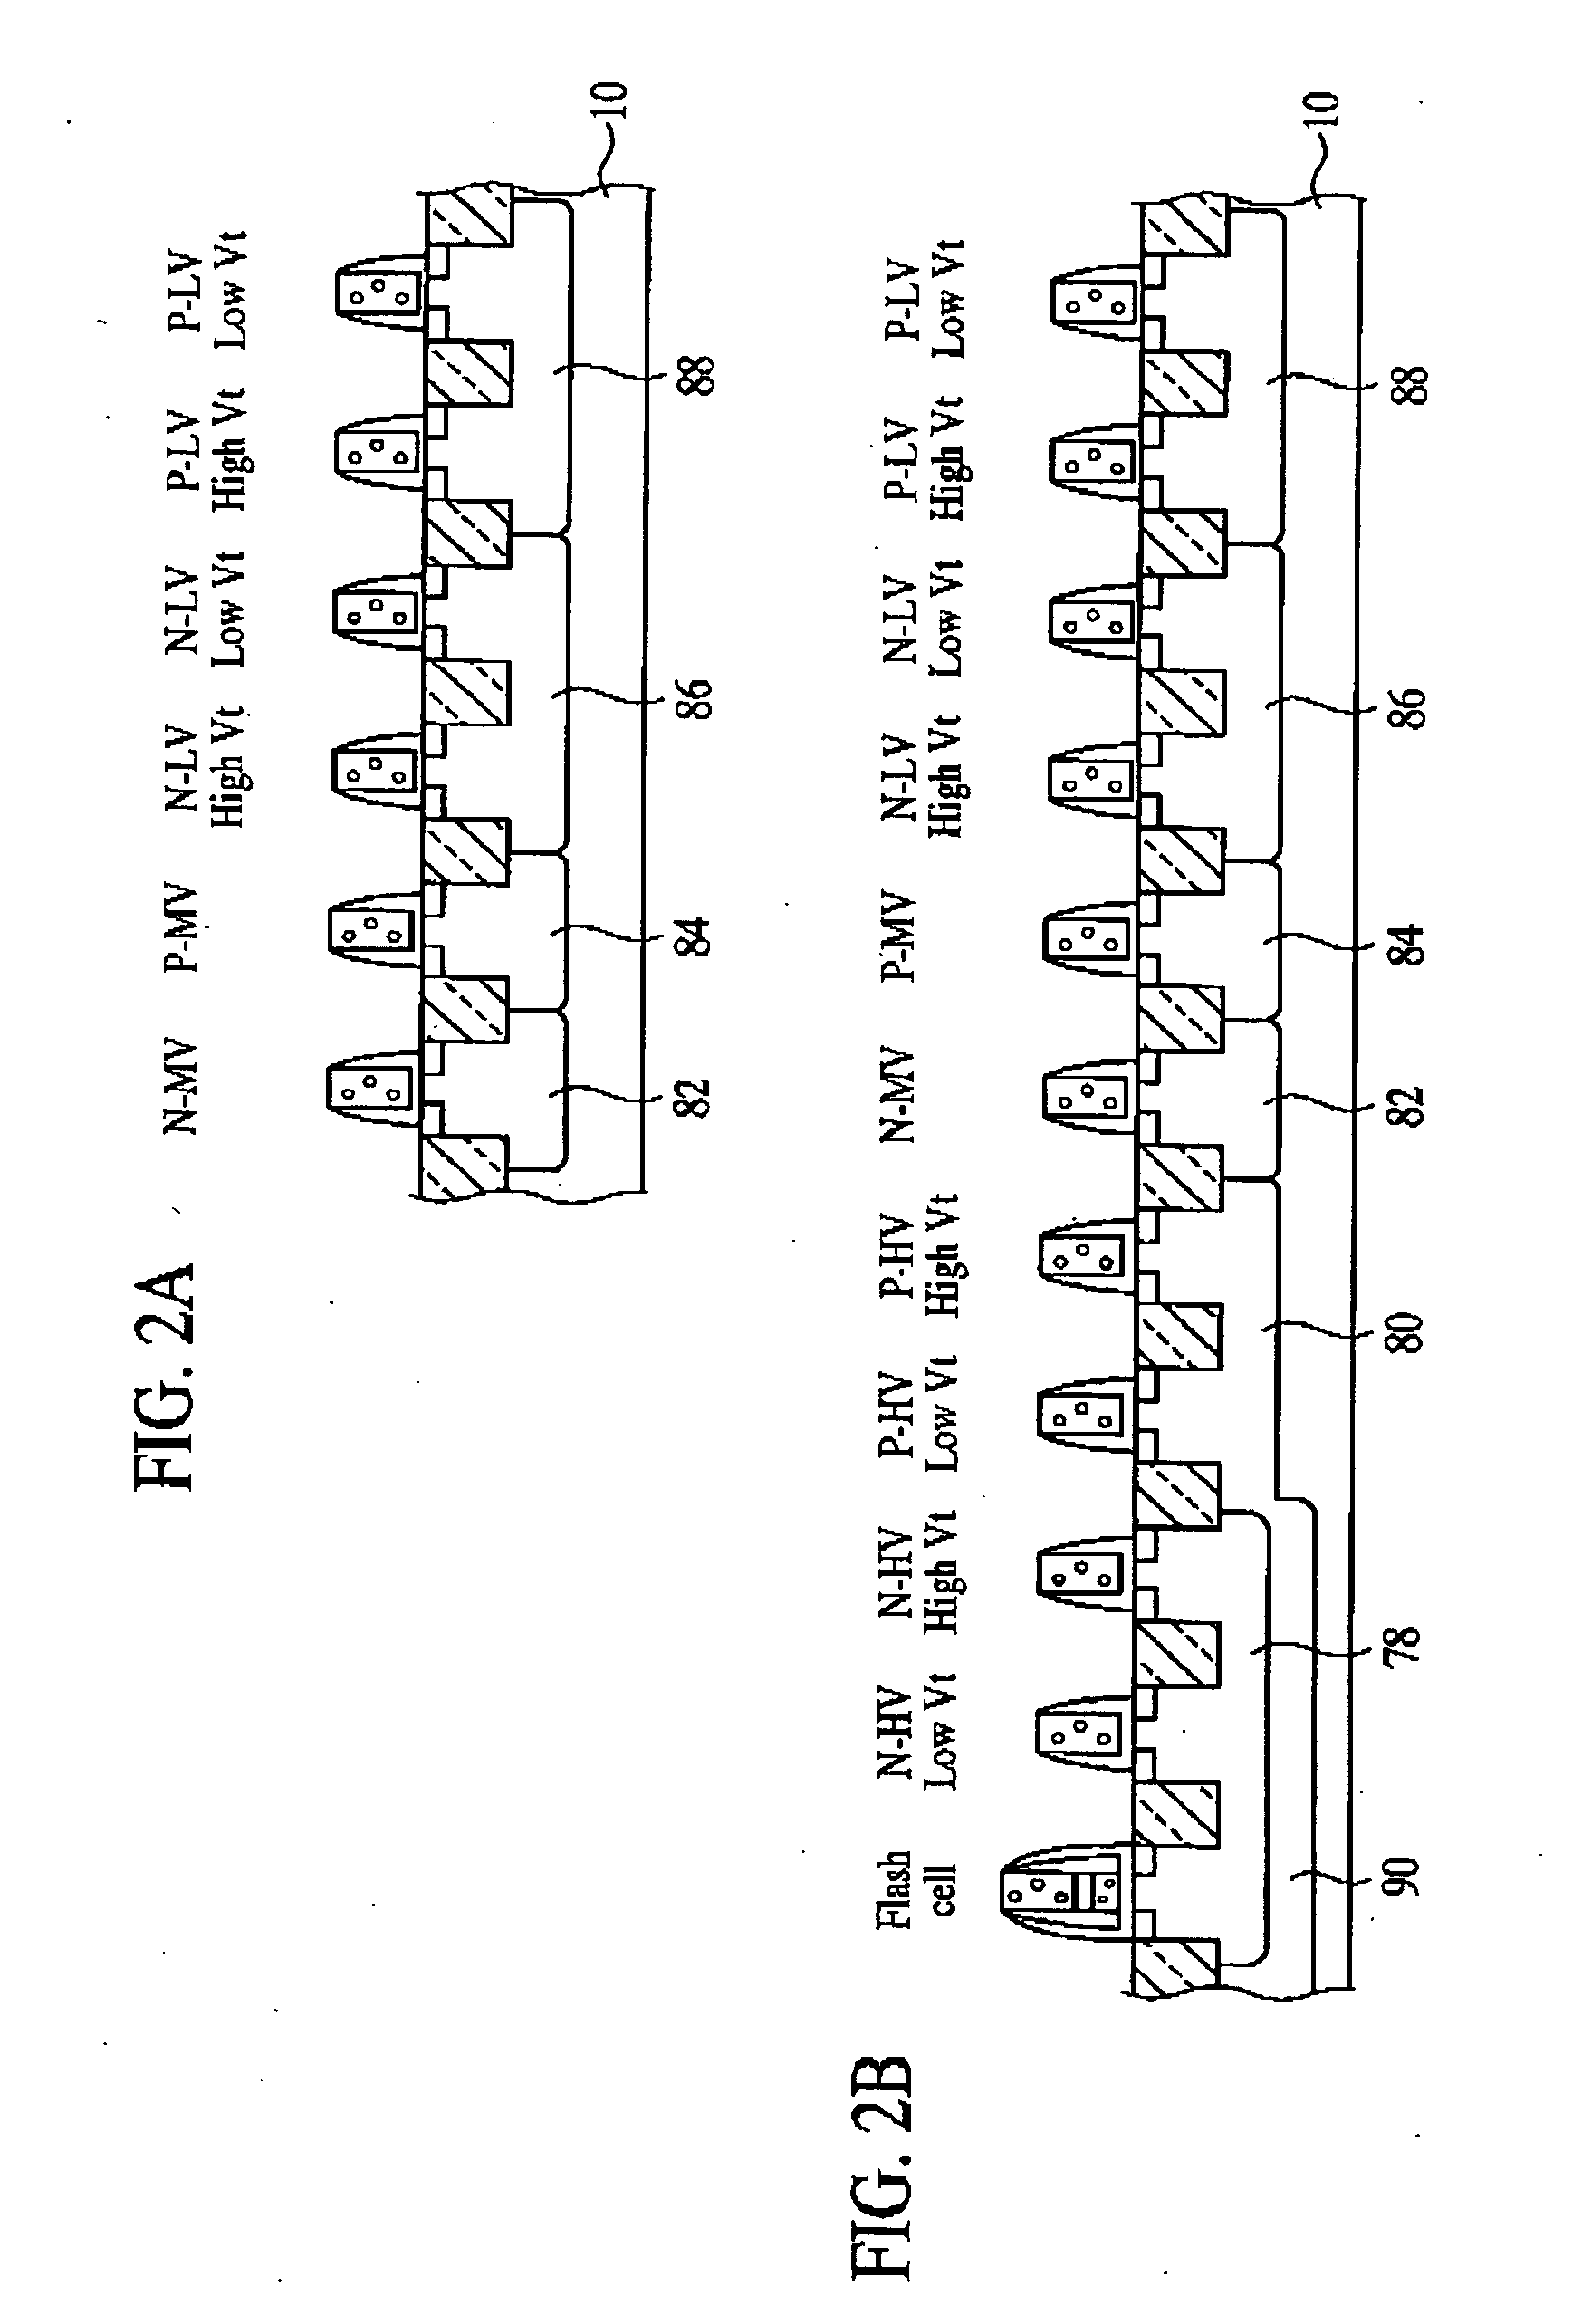 Semiconductor device group and method for fabricating the same, and semiconductor device and method for fabricating the same